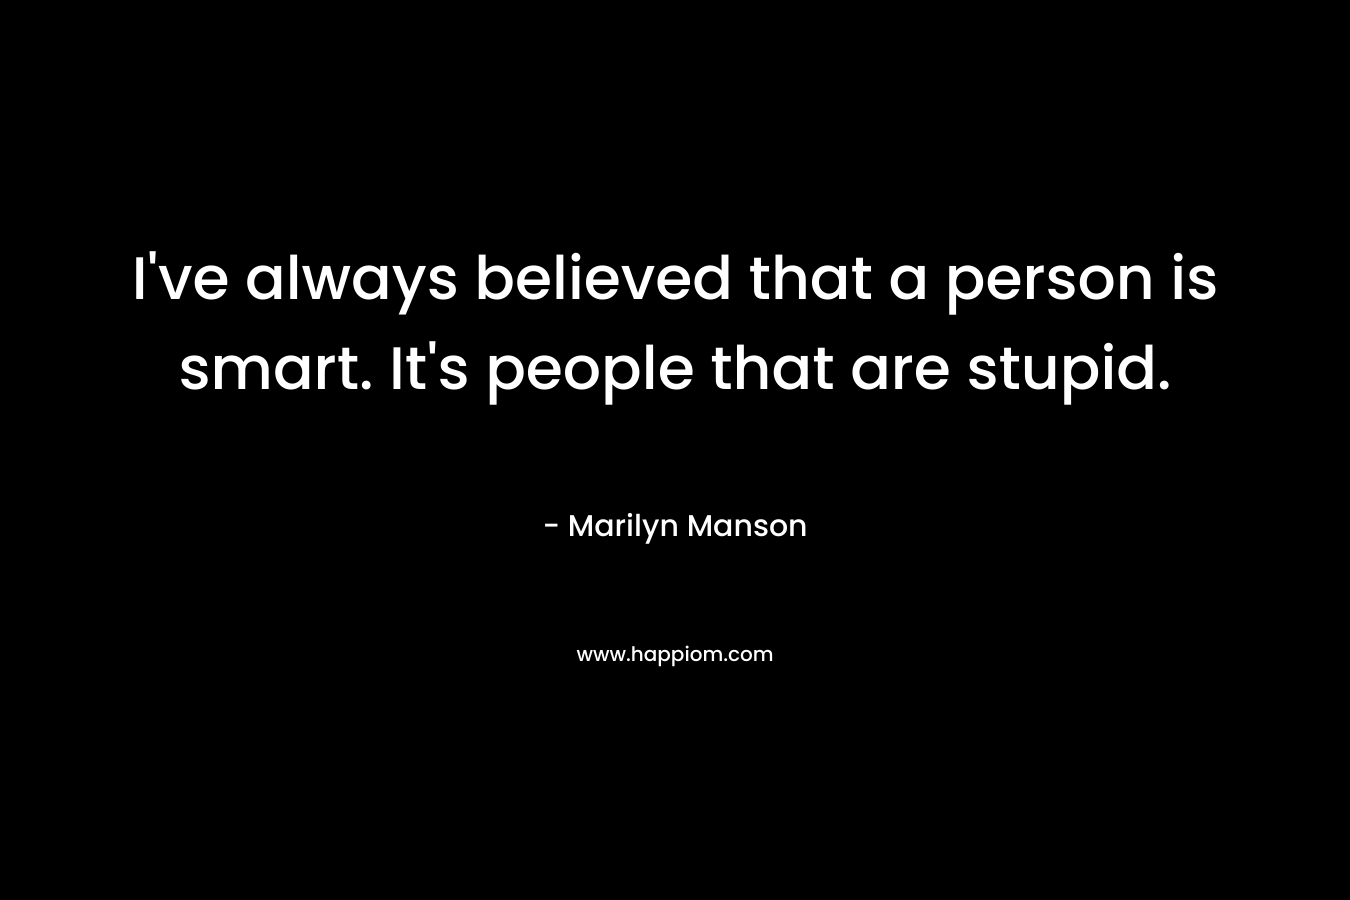 I've always believed that a person is smart. It's people that are stupid.